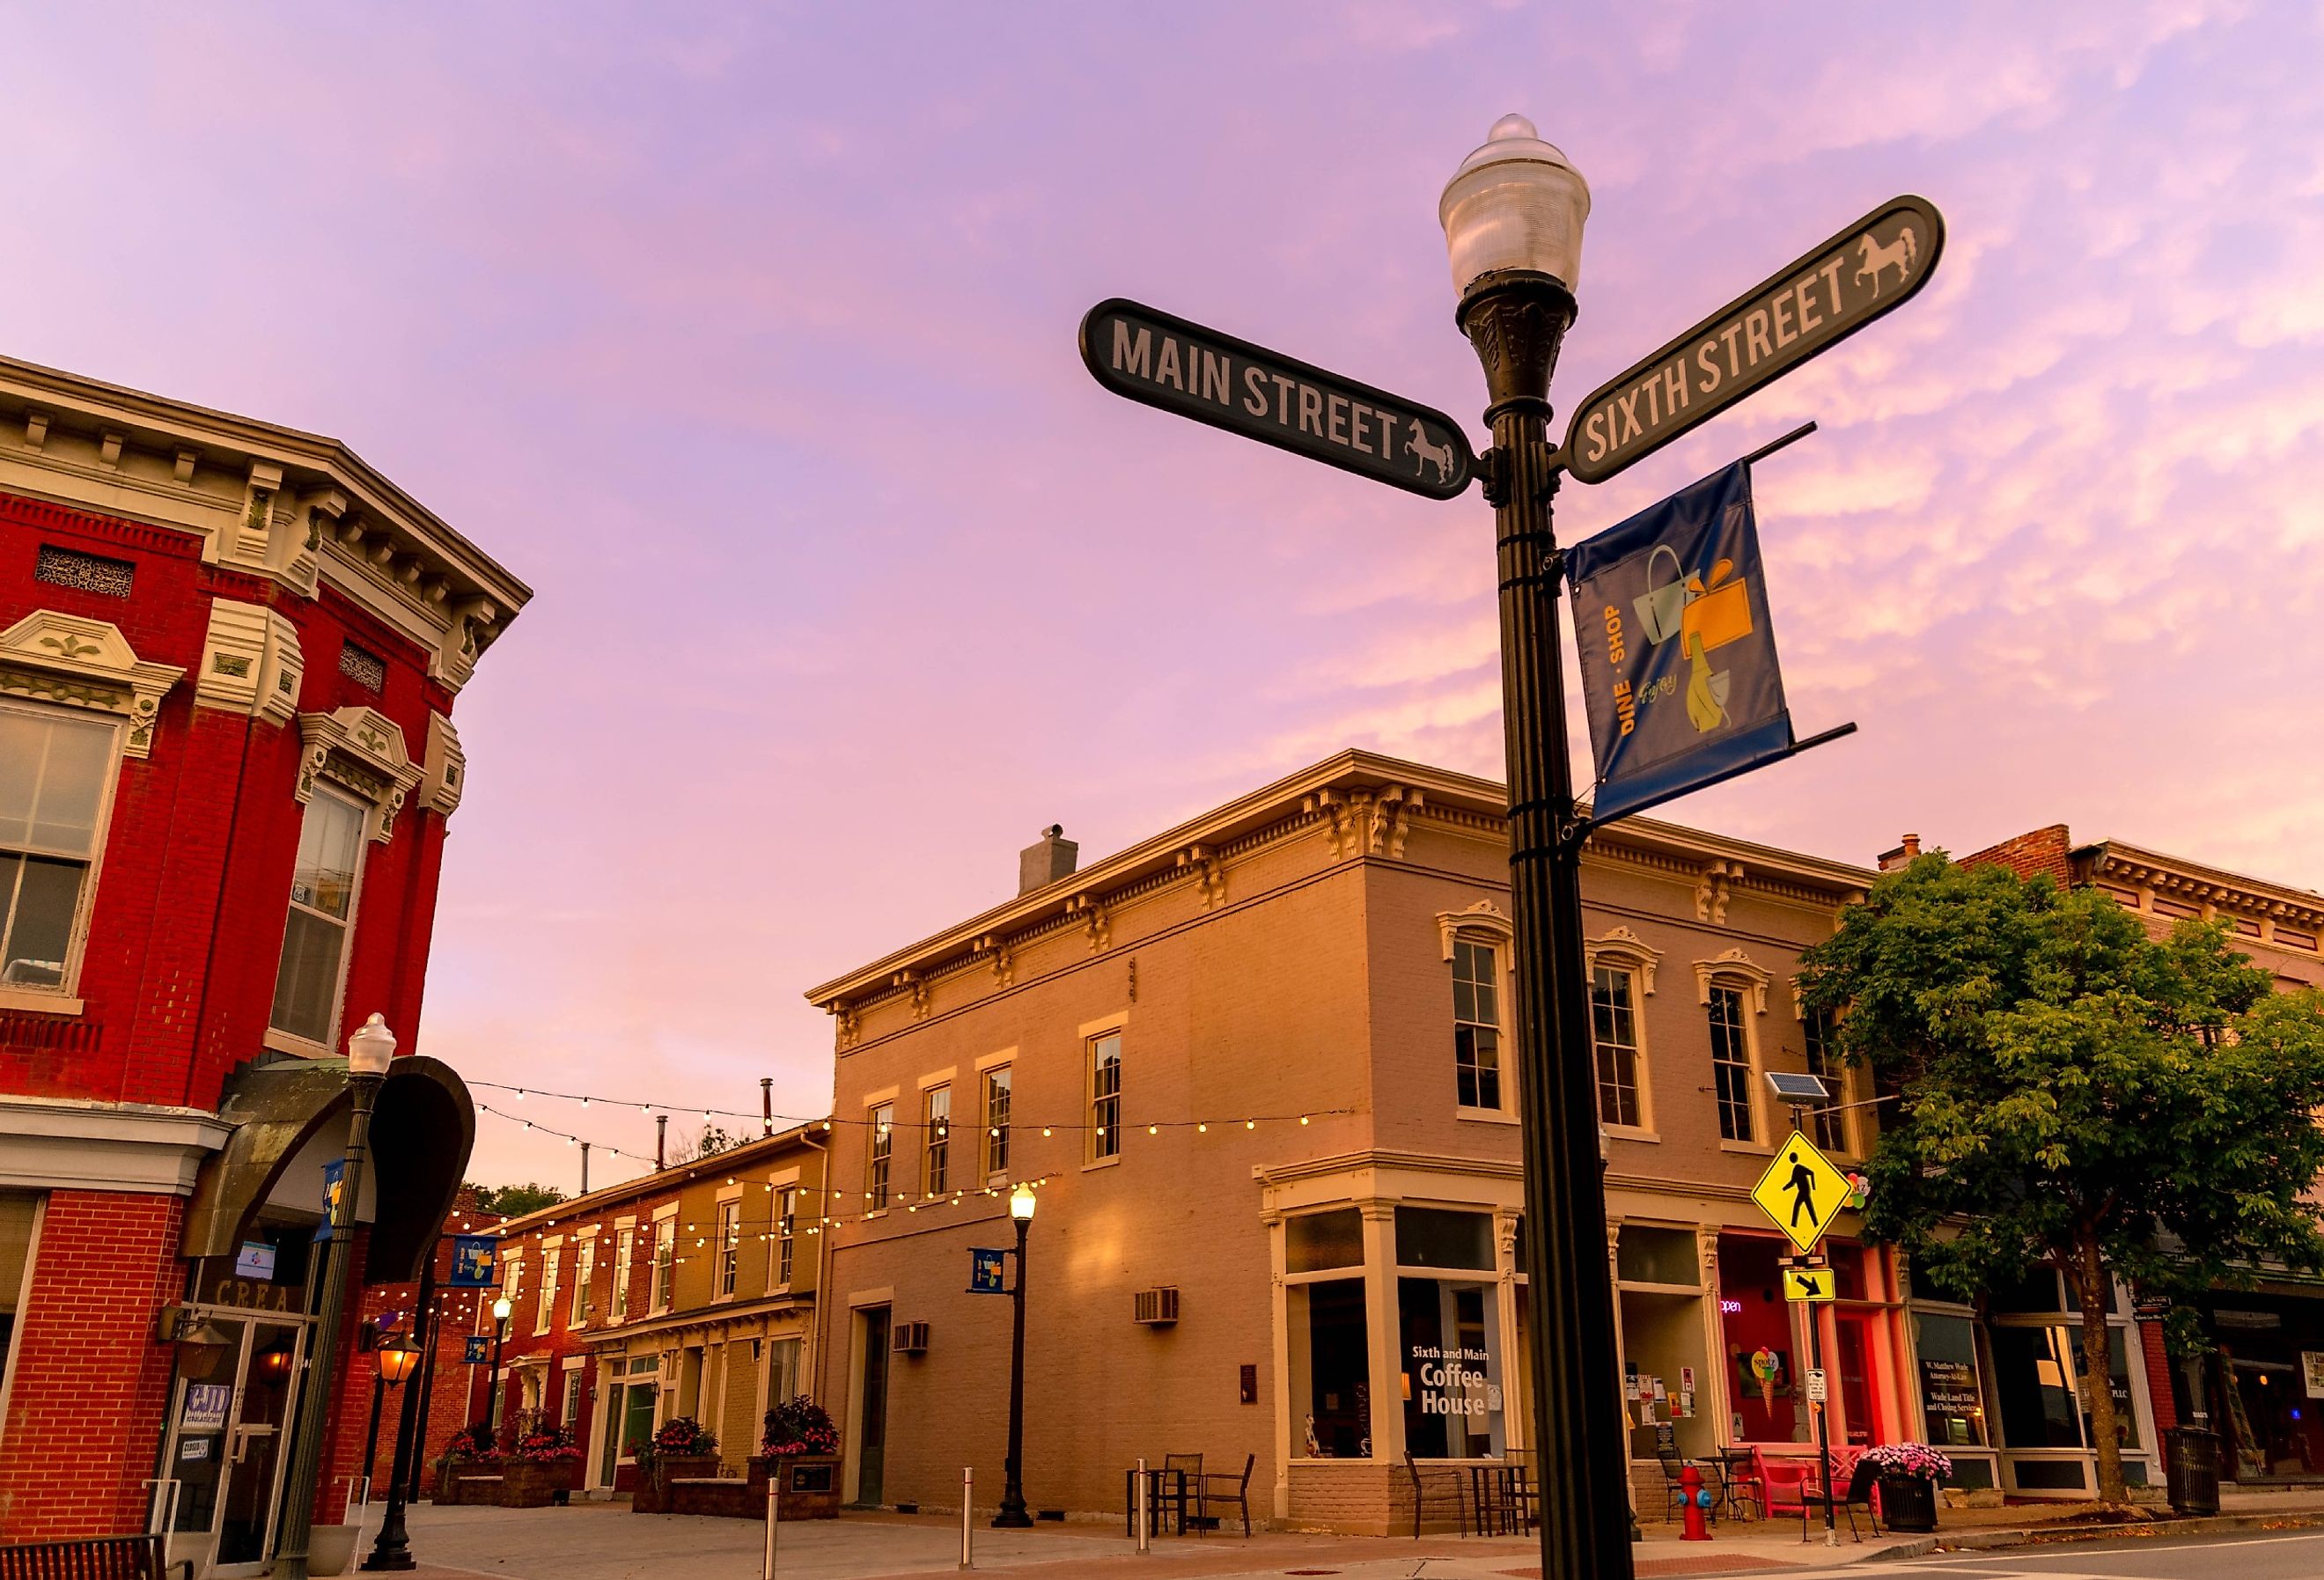 Downtown Historic District in Shelbyville, Kentucky. Image credit Blue Meta via Shutterstock